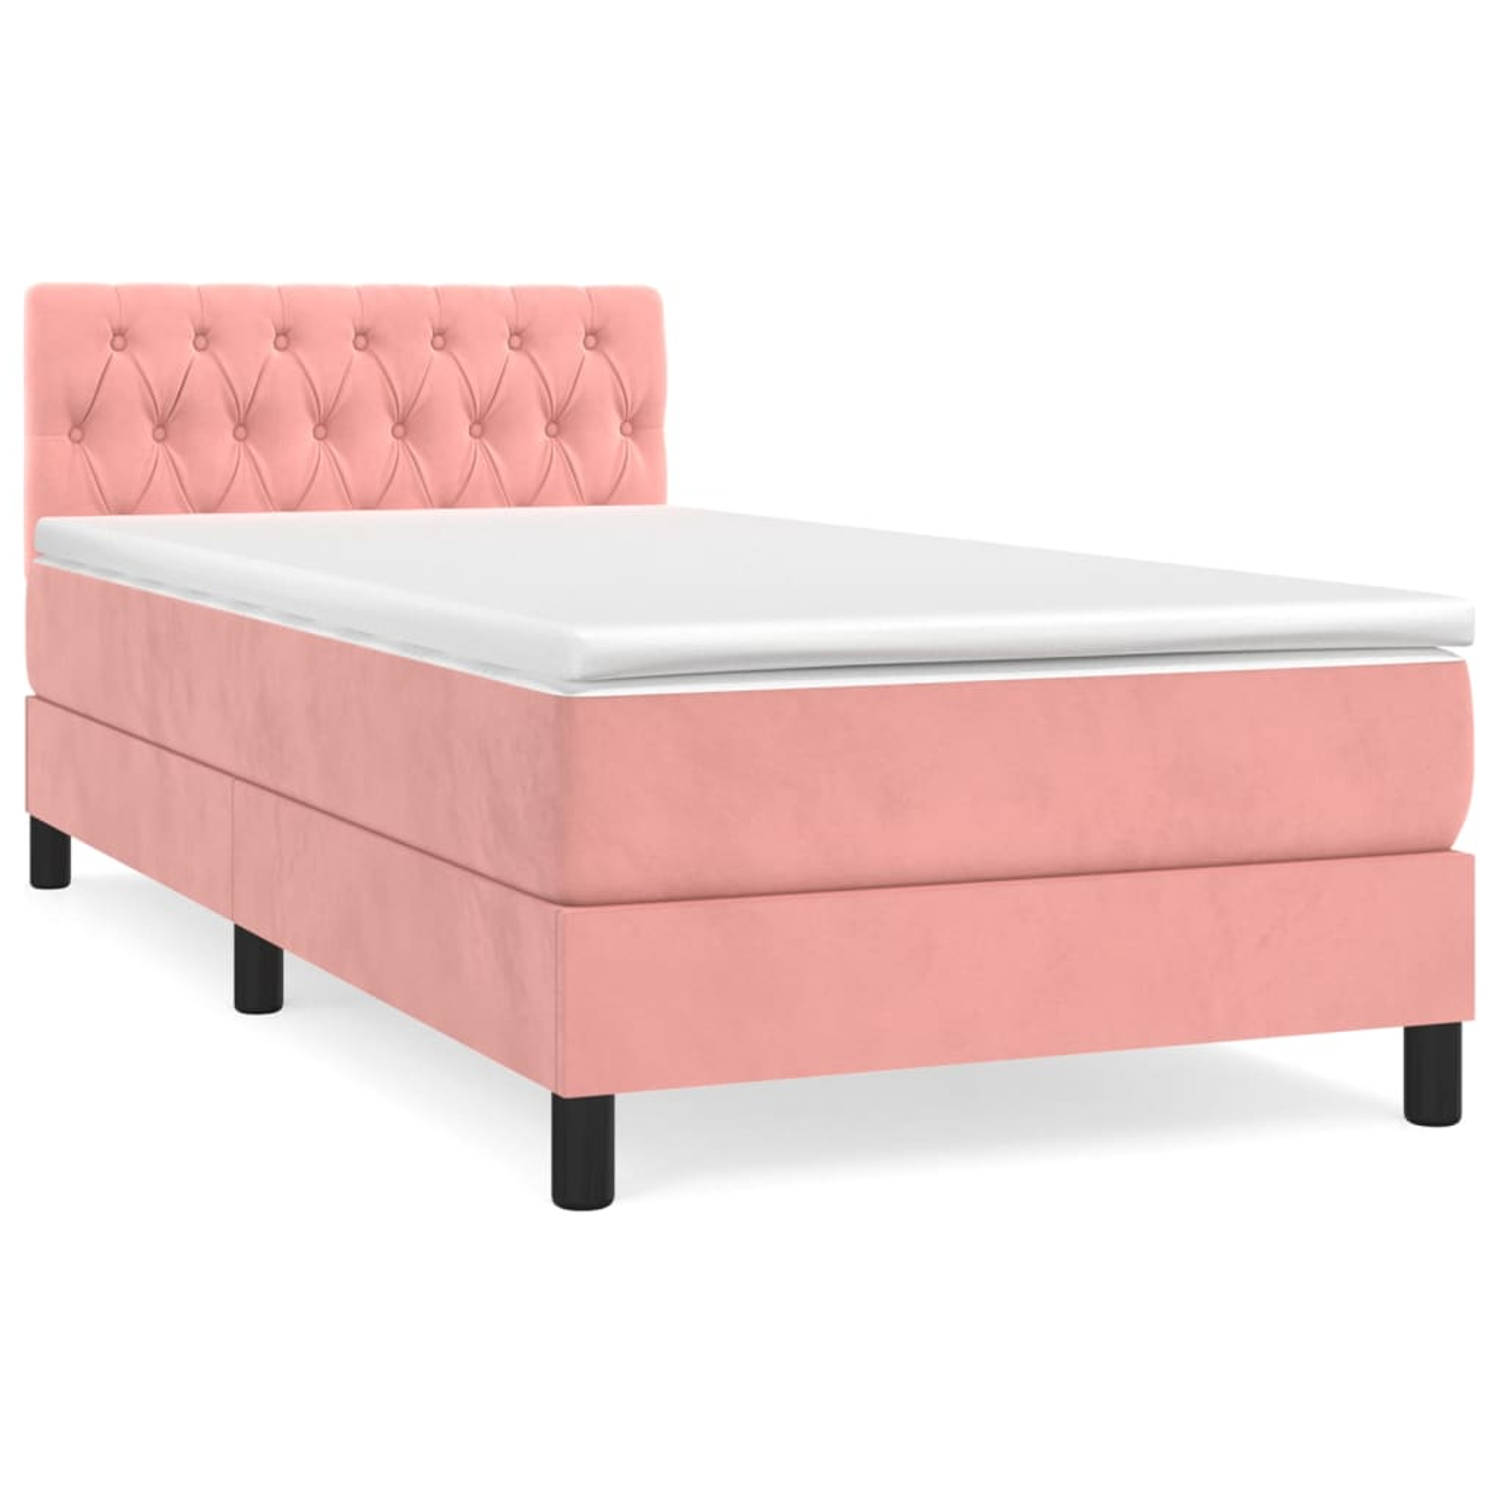 The Living Store Boxspringbed - Comfort - Bed - 193 x 90 x 78/88 cm - Fluweel